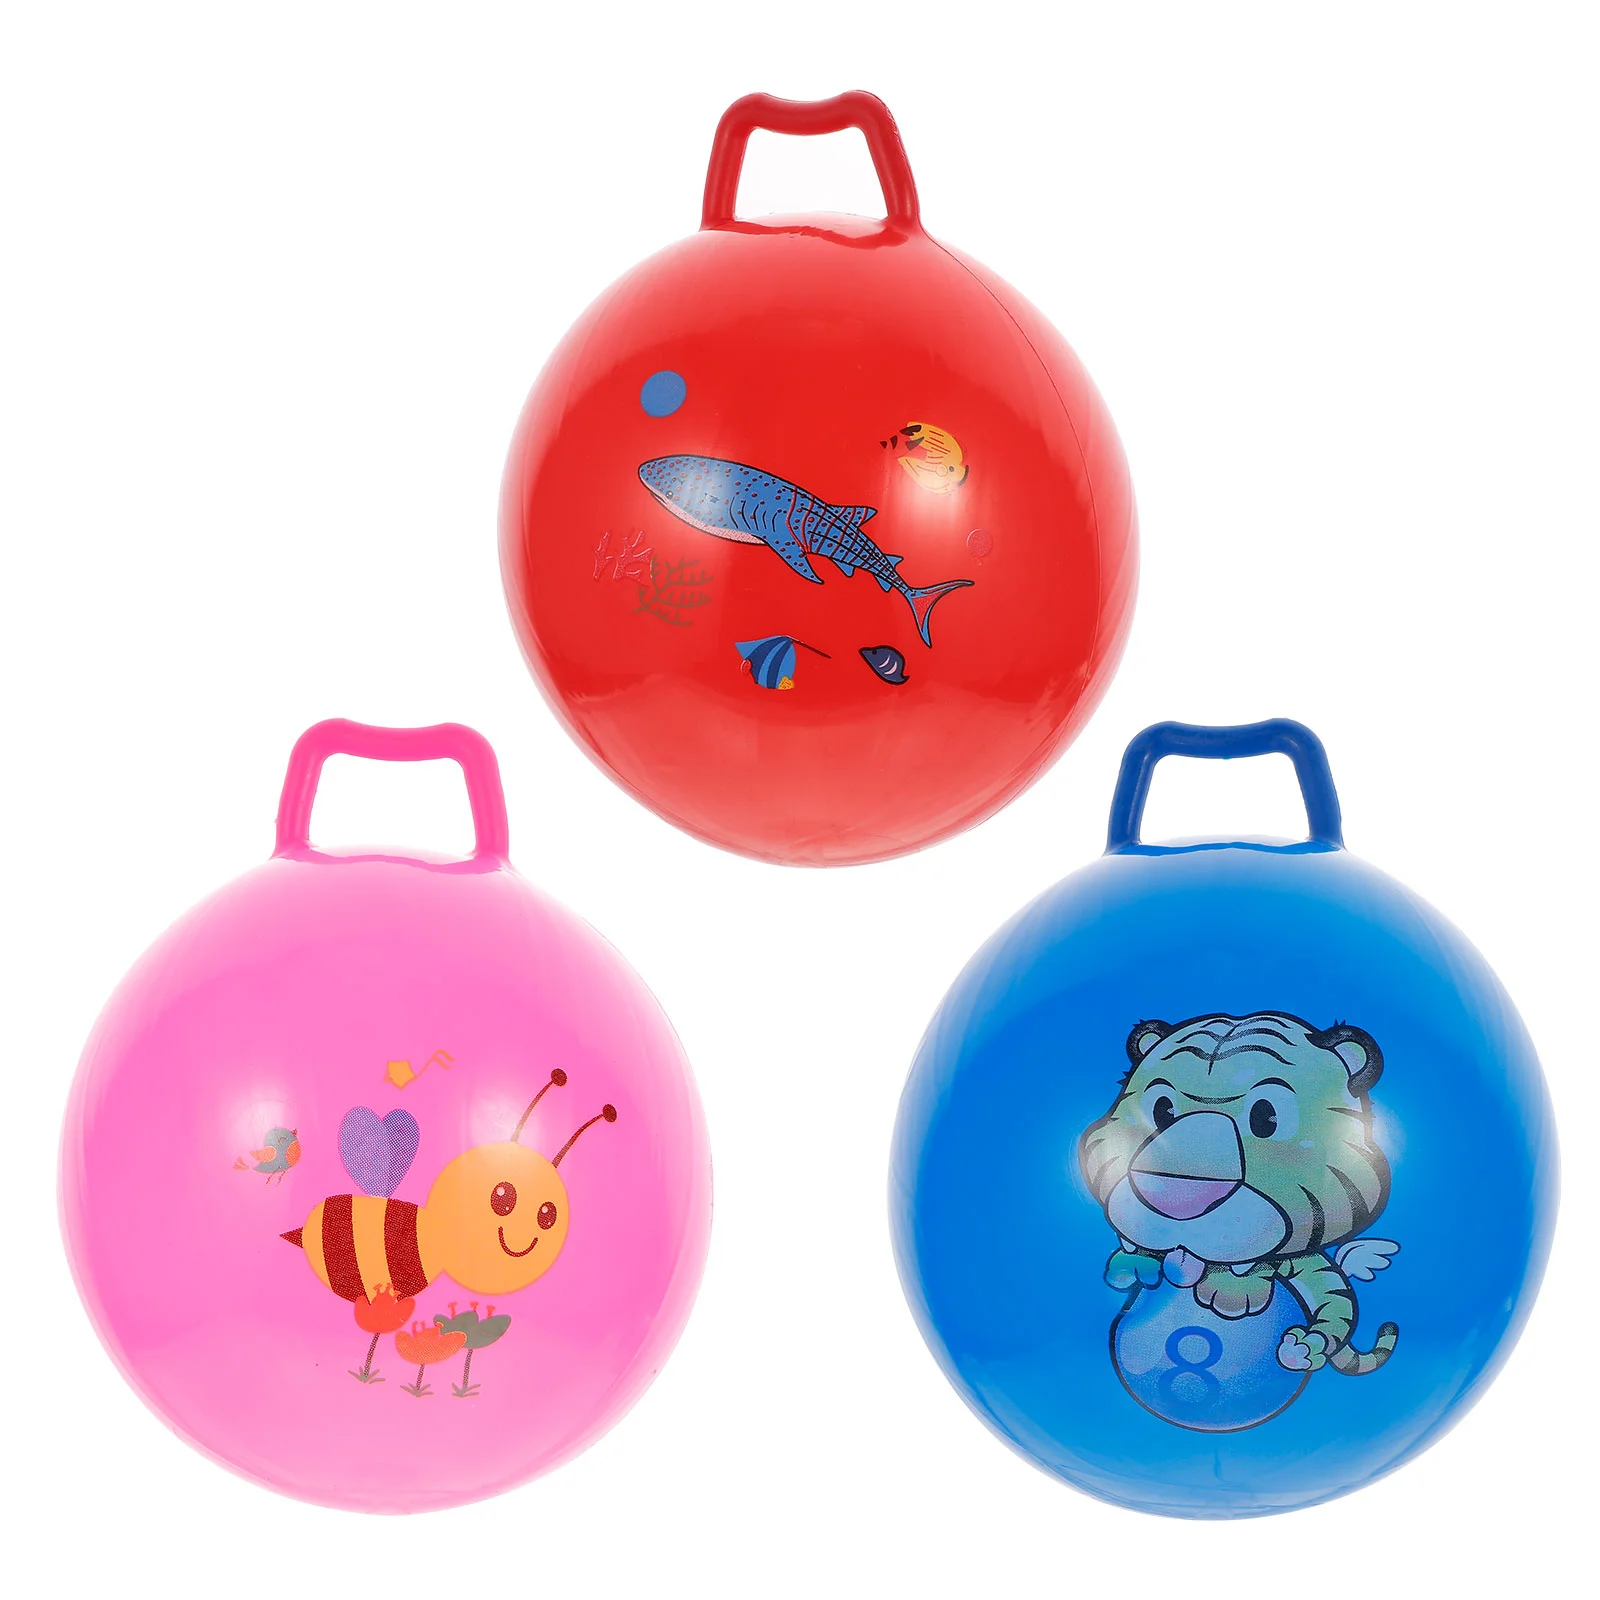 Hopper Kids Inflatabledodgeball Balls Sports Jumping Space Toddler Bounce Favors Party Play Playing Handball Bouncy Playground hopper kids inflatabledodgeball balls sports jumping space toddler bounce favors party play playing handball bouncy playground